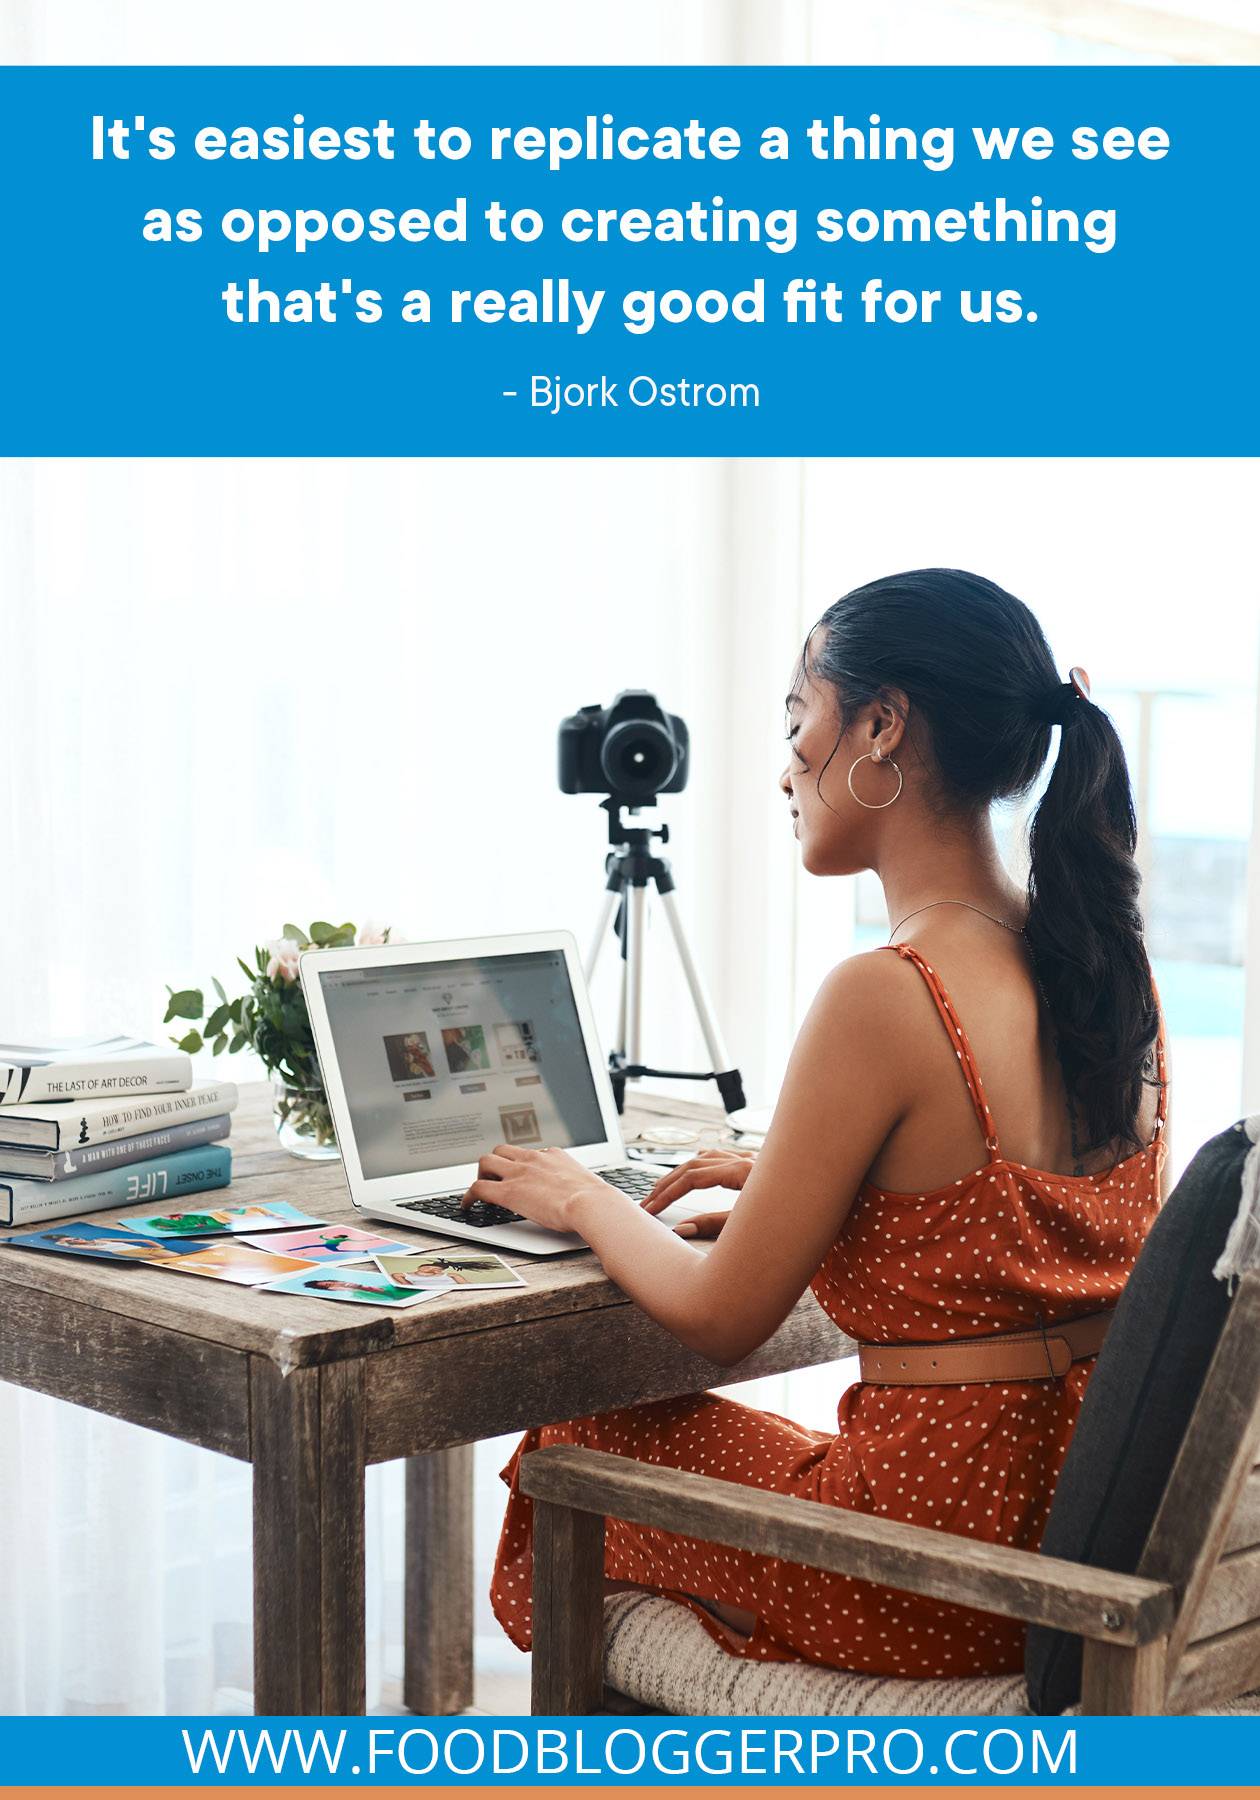 A photograph of a woman sitting at a laptop with a quote from Bjork Ostrom's episode of The Food Blogger Pro Podcast, "It's easiest to replicate a thing we see as opposed to creating something that's a really good fit for us."